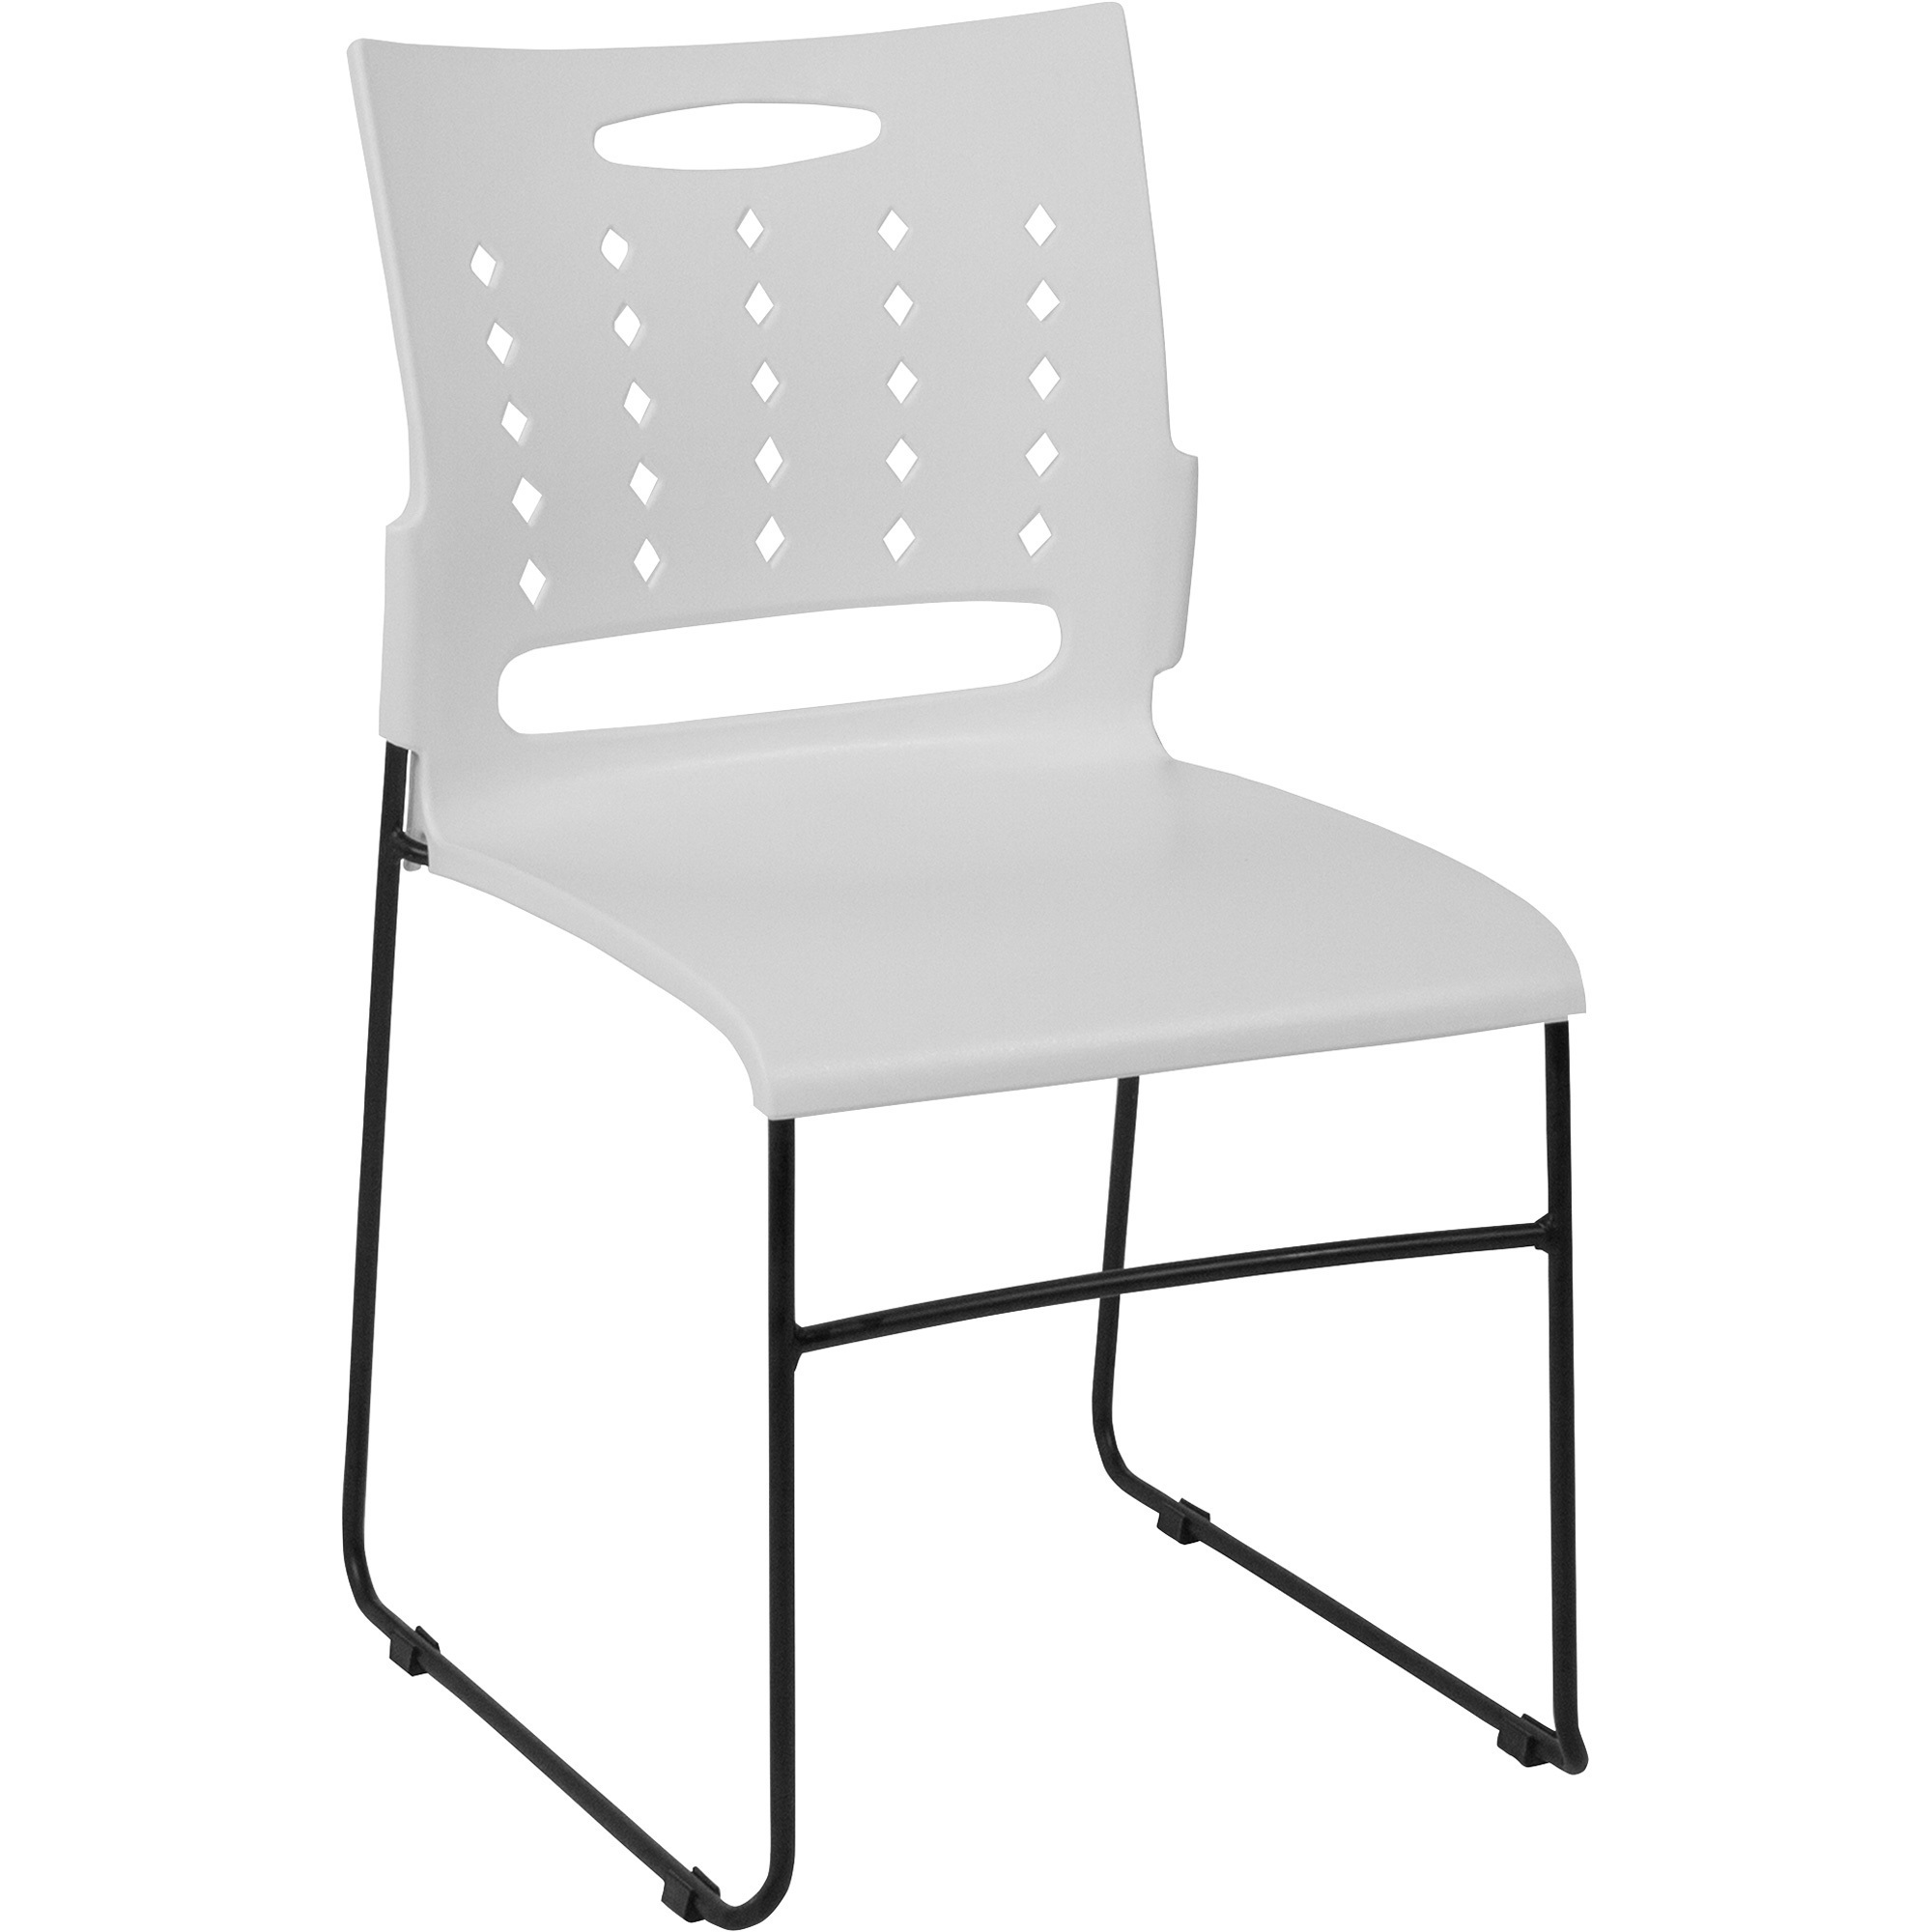 Flash Furniture Indoor/Outdoor Sled Base Stack Chair â White, 881-Lb. Capacity, 17 1/2Inch H Seat, Model RUT2WH